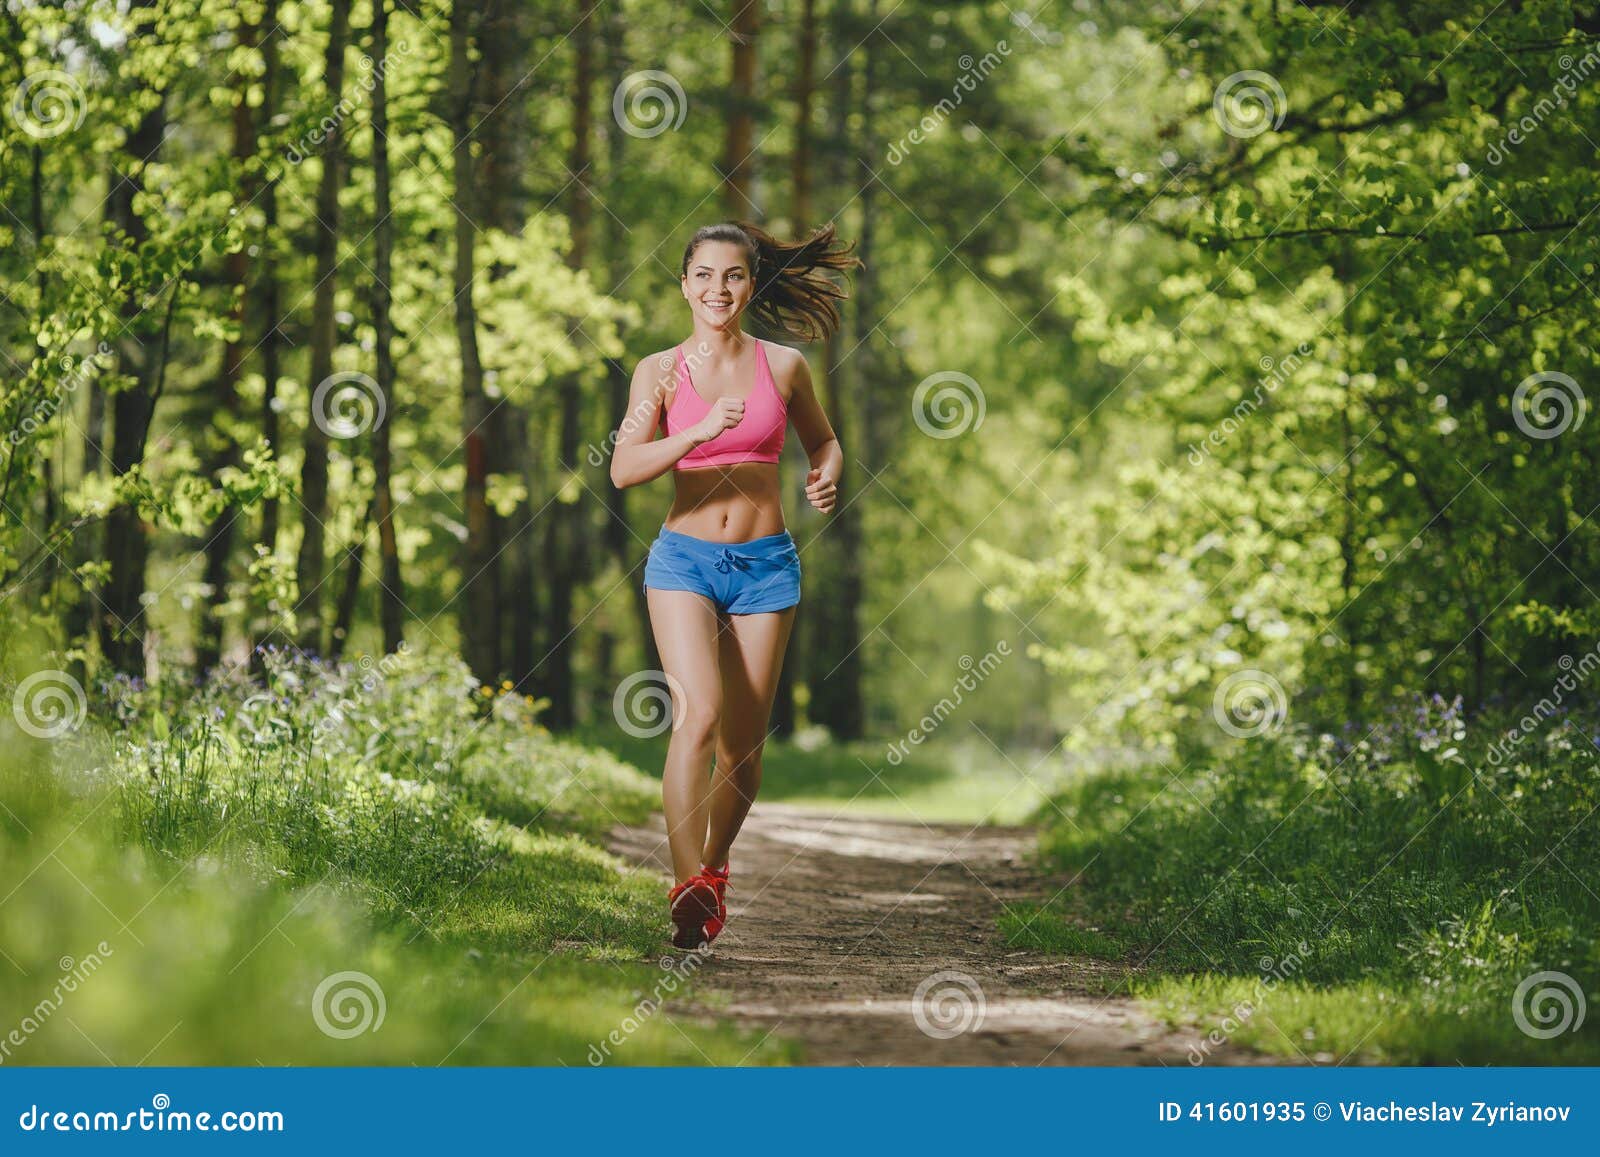 Fitness Girl Running On Forest Trail And Smiling Stock Image - Image of girl,  jogging: 41601935